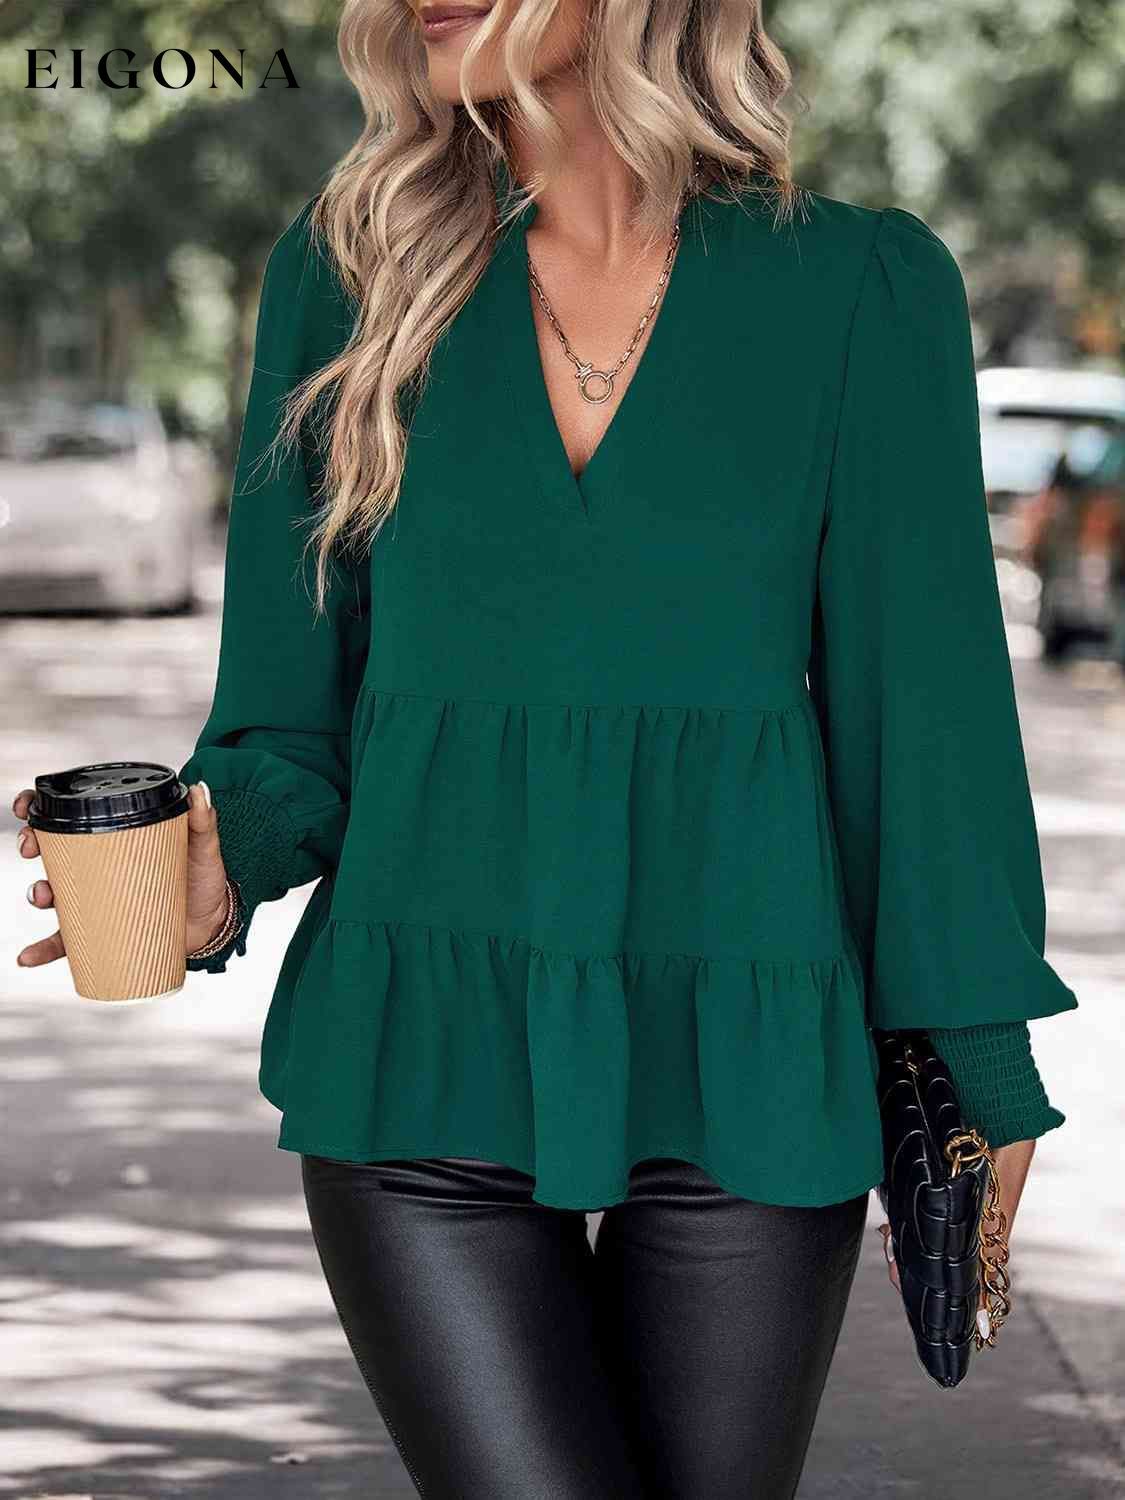 Notched Neck Lantern Sleeve Blouse clothes Hundredth long sleeve shirts long sleeve top long sleeve tops Ship From Overseas shirt shirts top tops